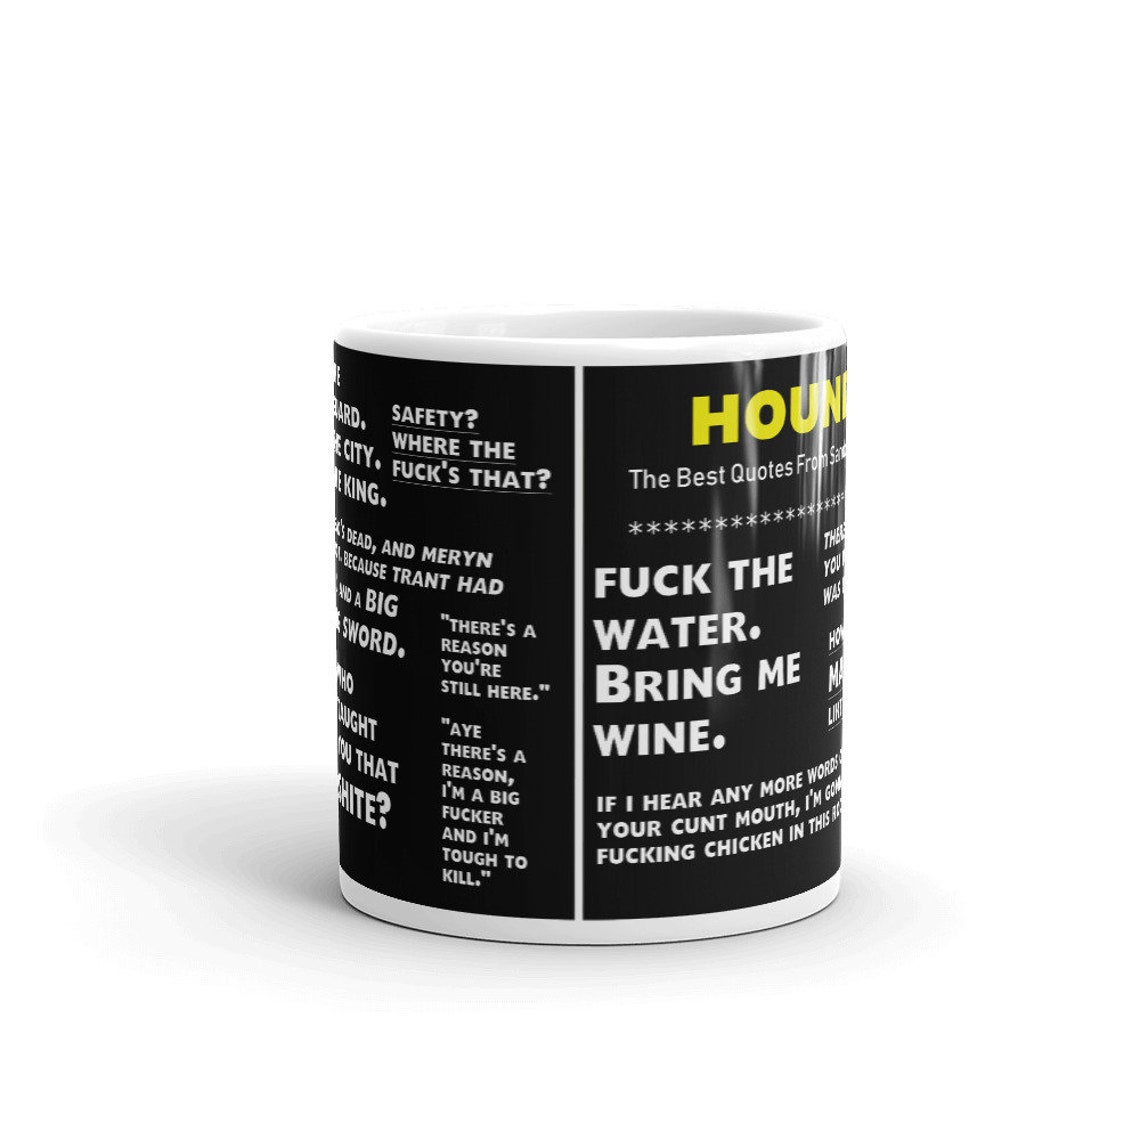 Sandor Clegane The Hound Quotes Mug / Game of Thrones HBO